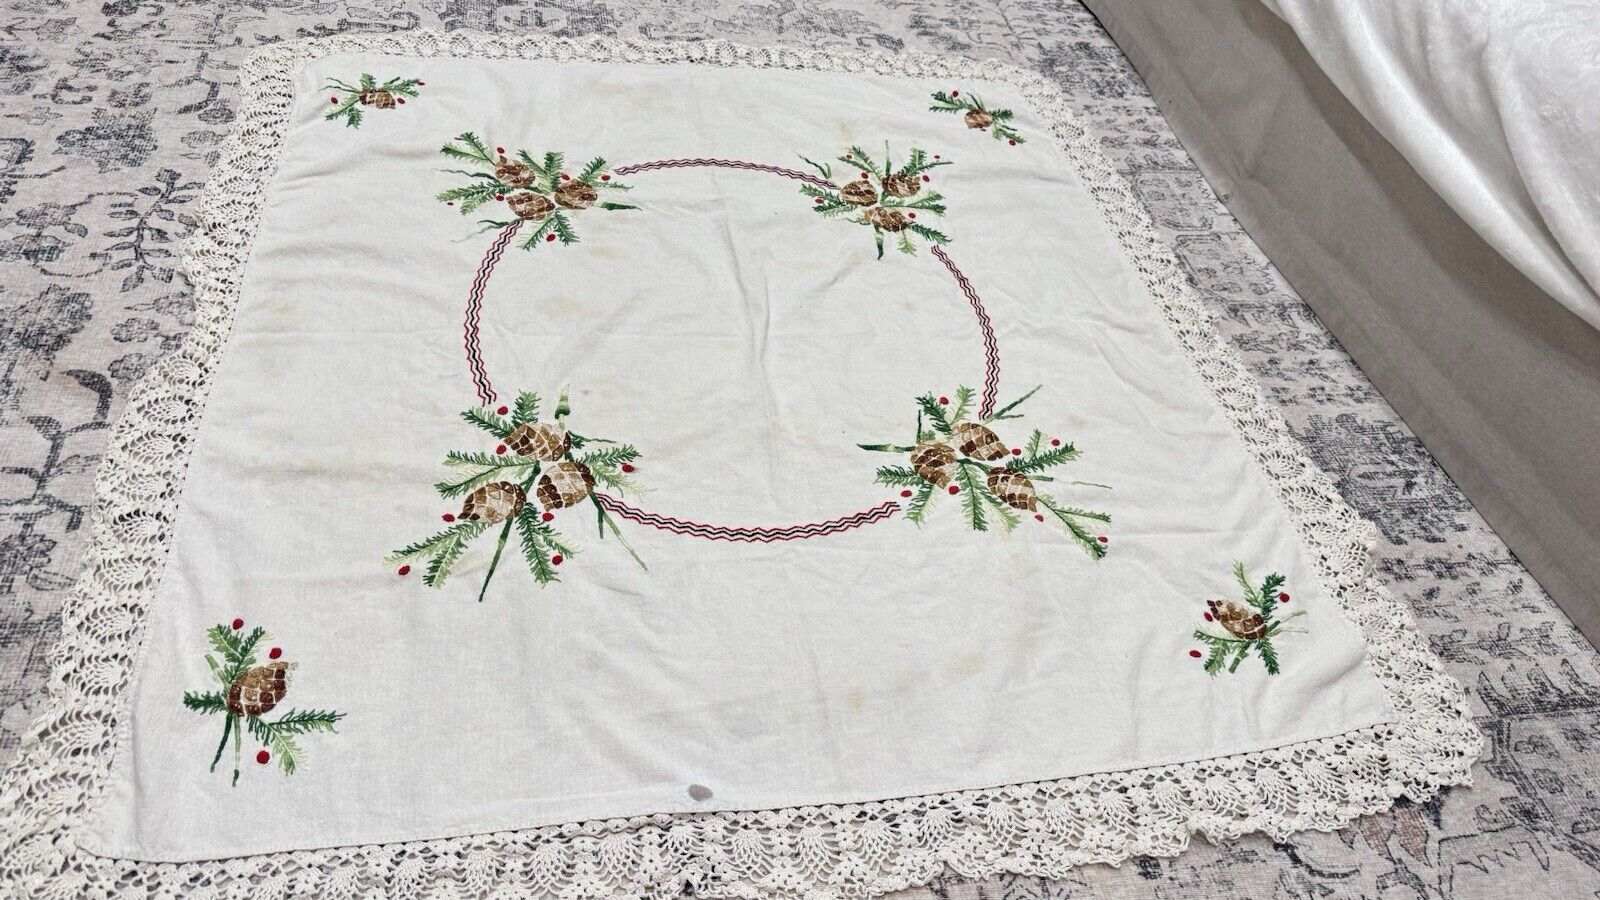 Vintage 1950s Hand Embroidered Crochet Linen Blend Christmas Tablecloth 51”x49”h